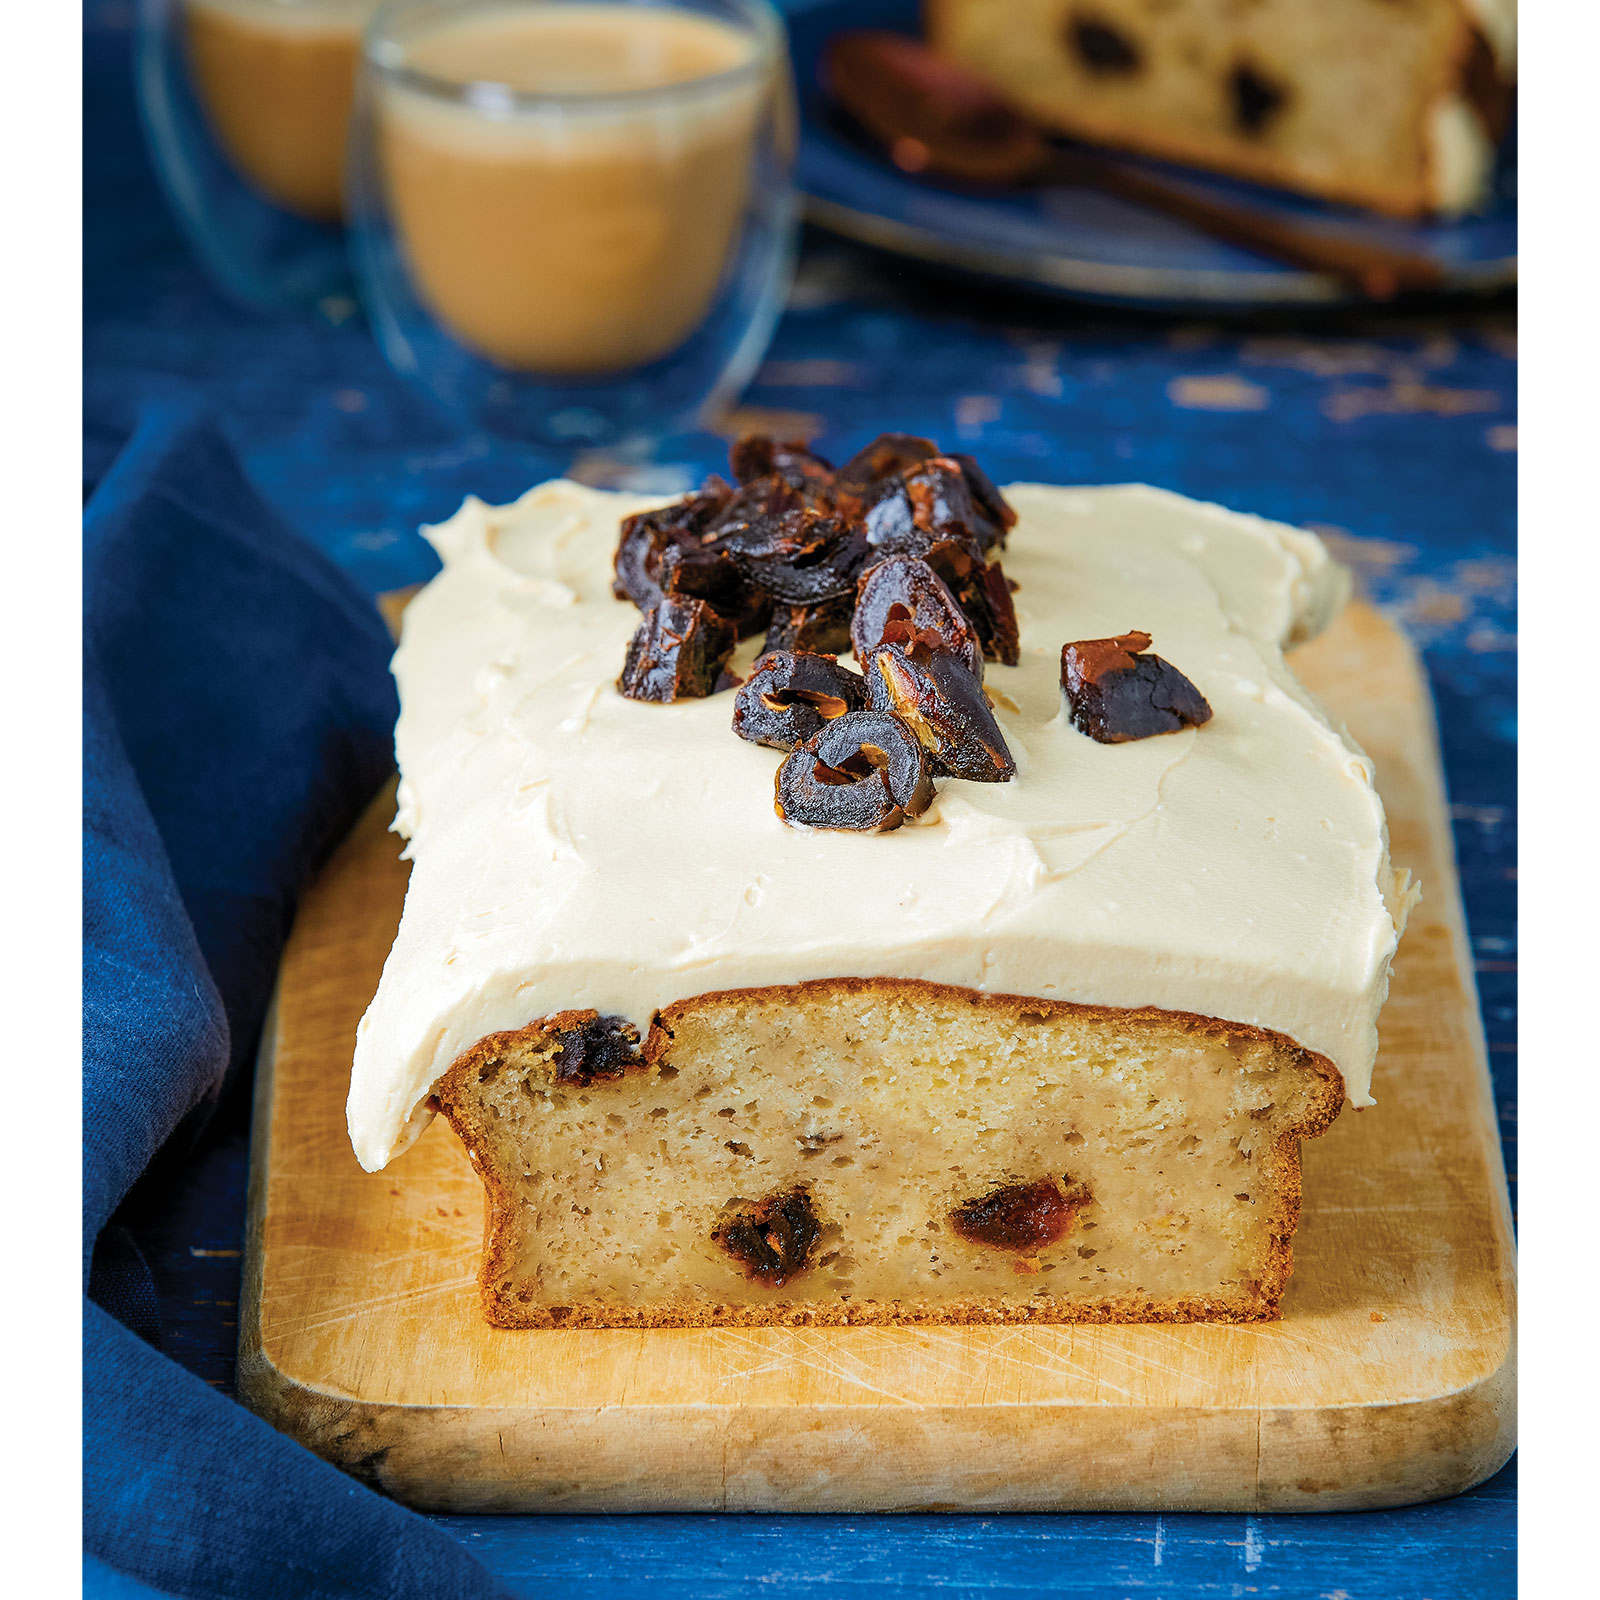 Vegan Tahini and Date Banana Bread with frosting sits on a wooden board. A slice of this gluten-free and vegan banana bread is on a plate next to a coffee at the back.